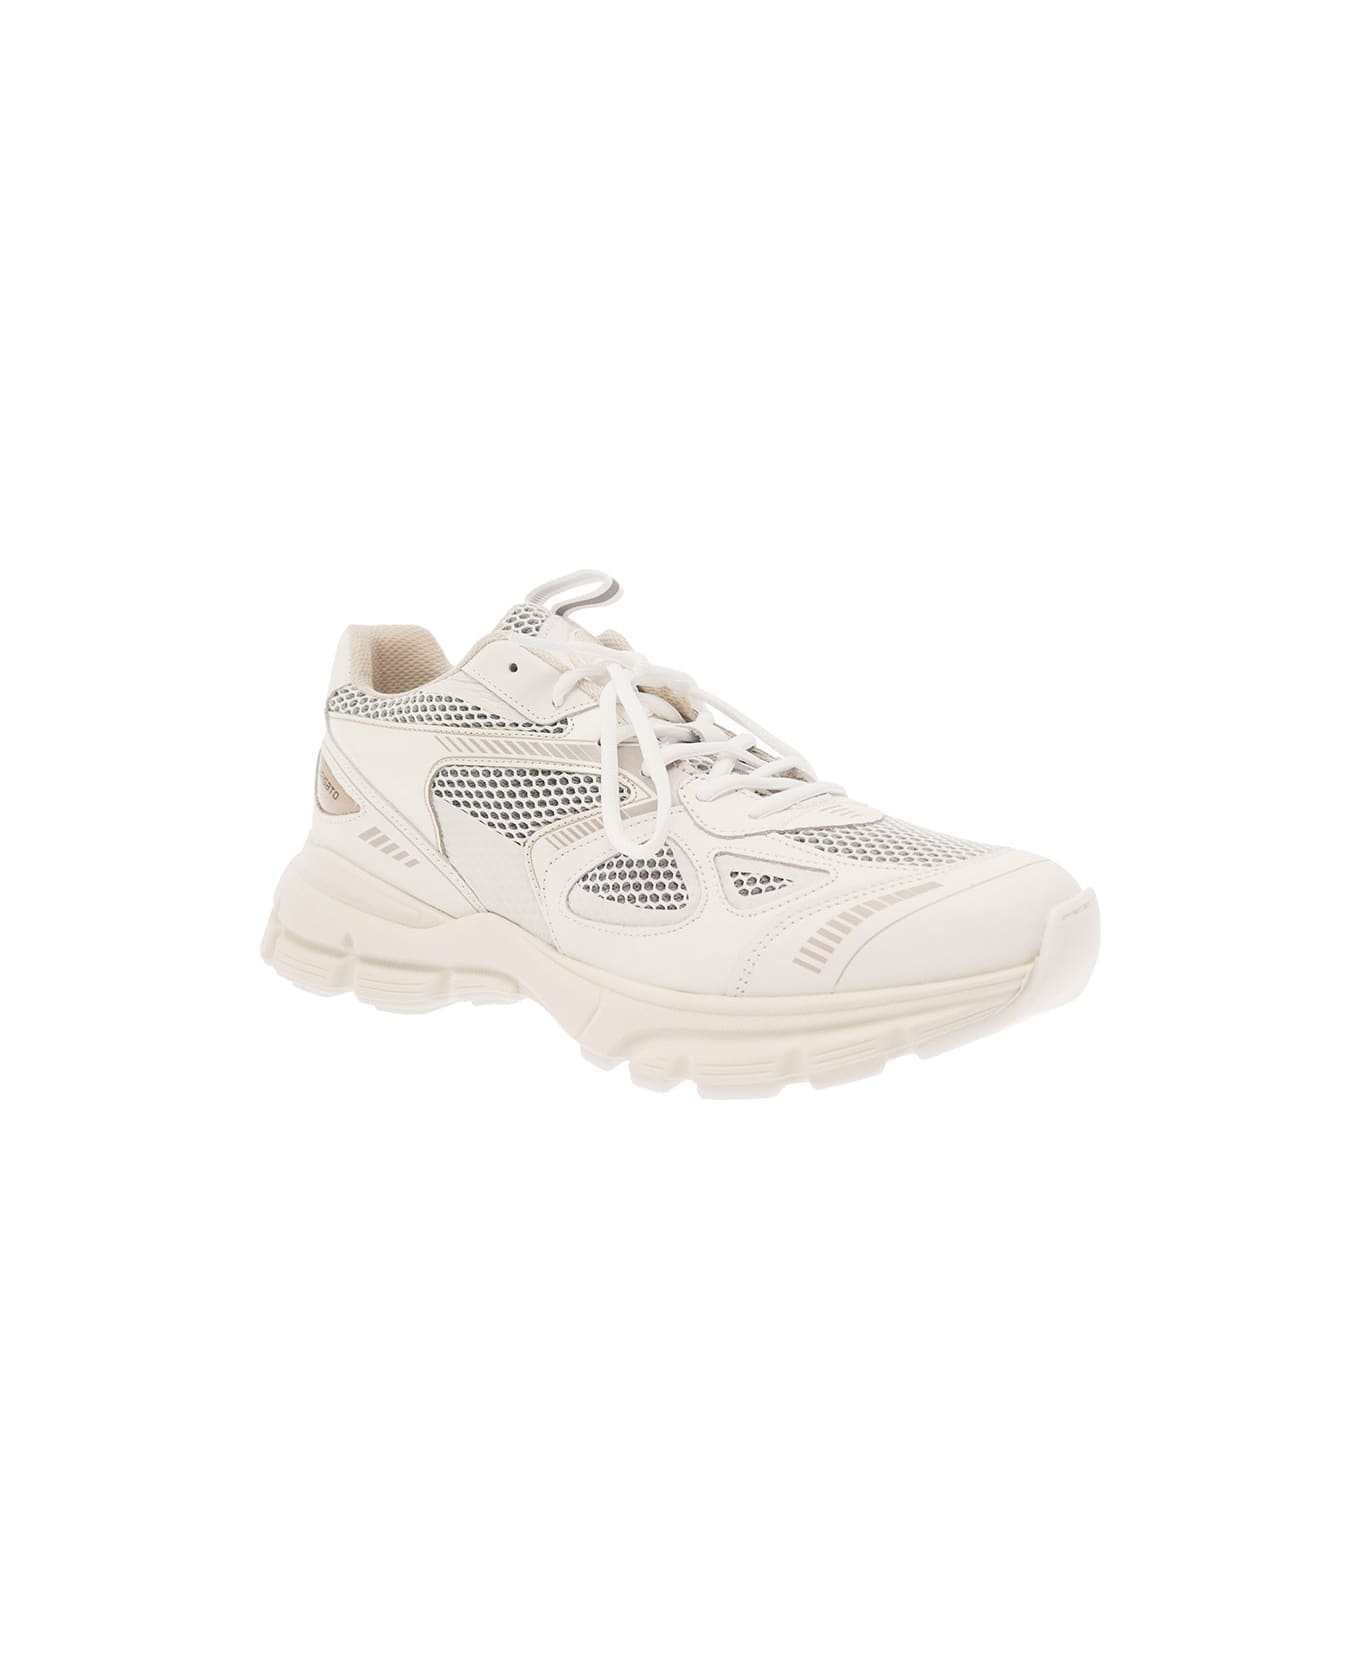 Axel Arigato 'marathon Runner' White Low Top Sneakers With Reflective Details In Leather Blend Man - White スニーカー